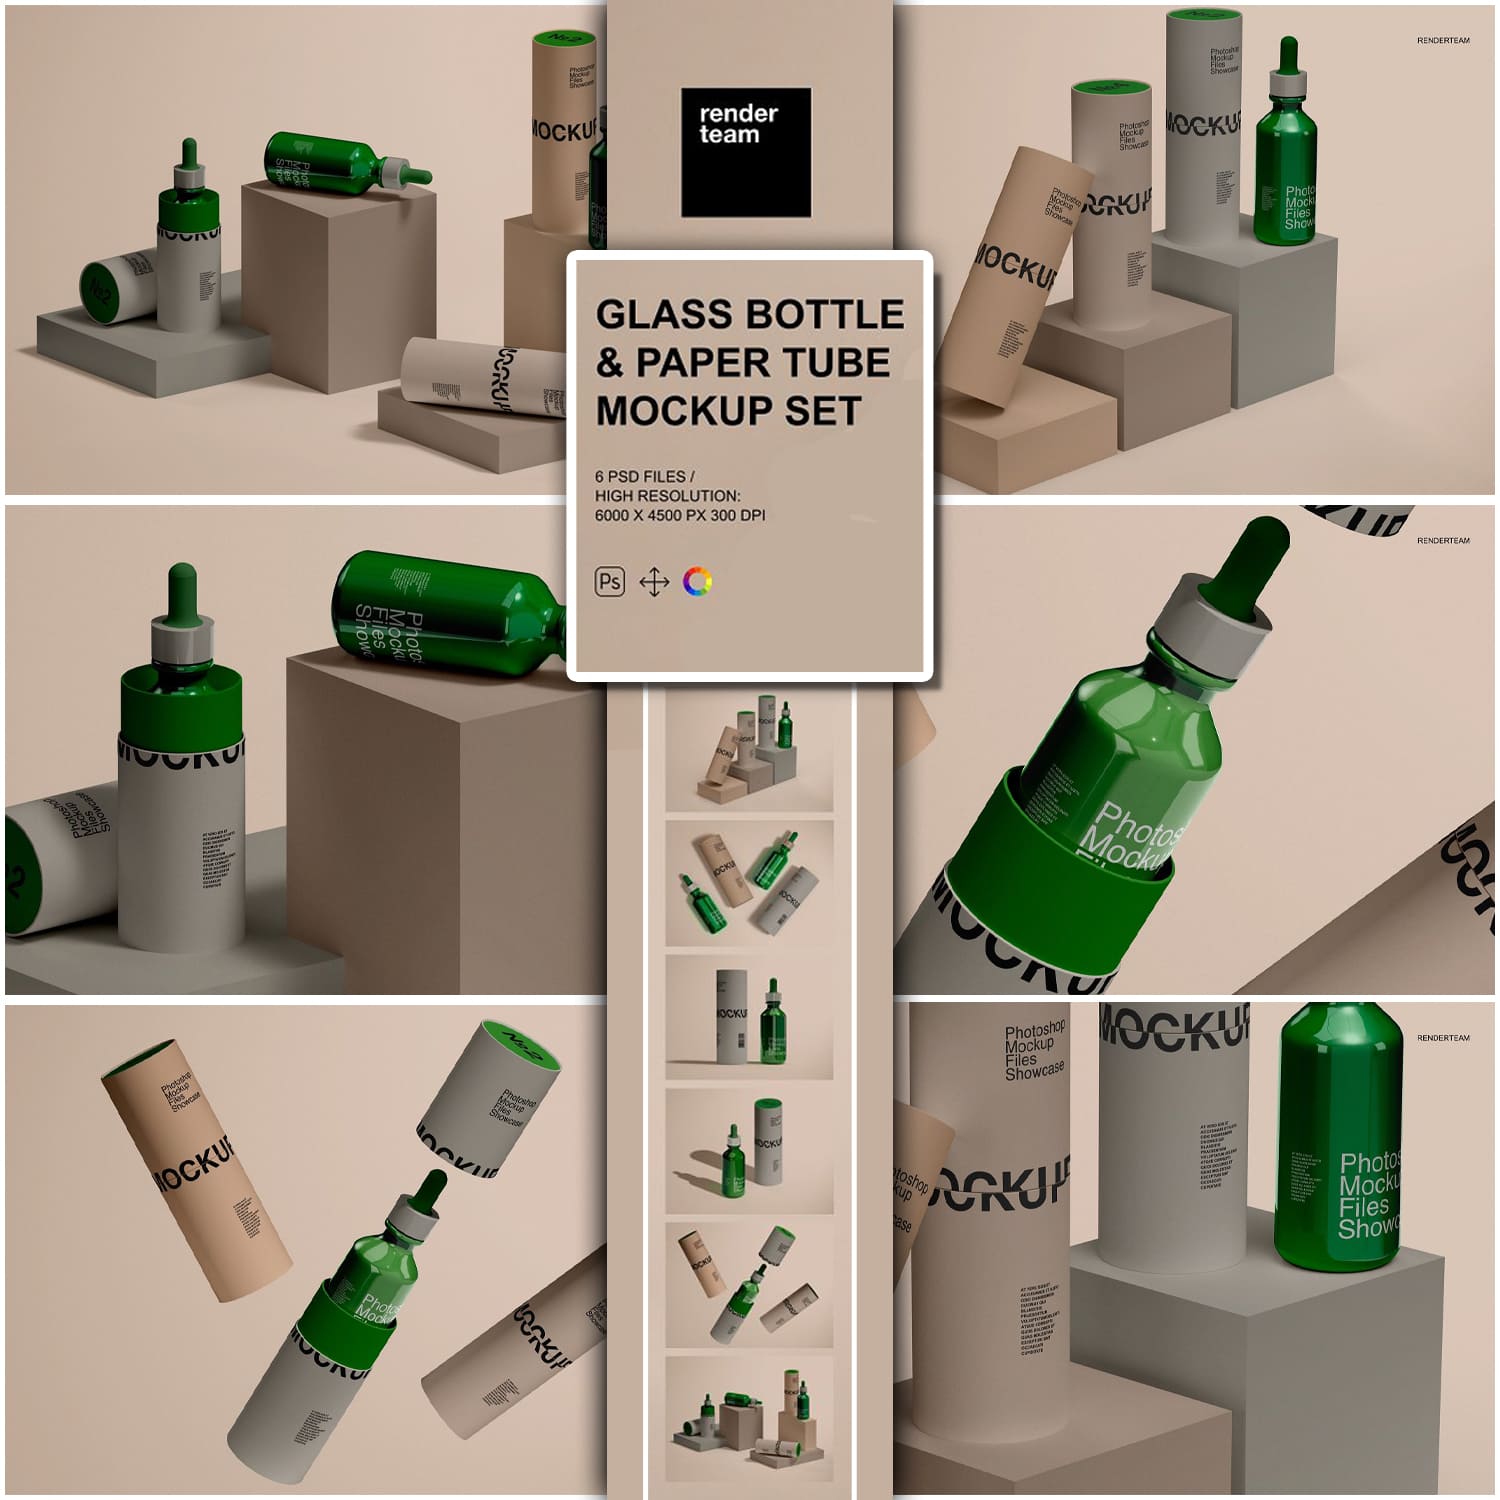 Prints of glass bottle and paper tube mockups.